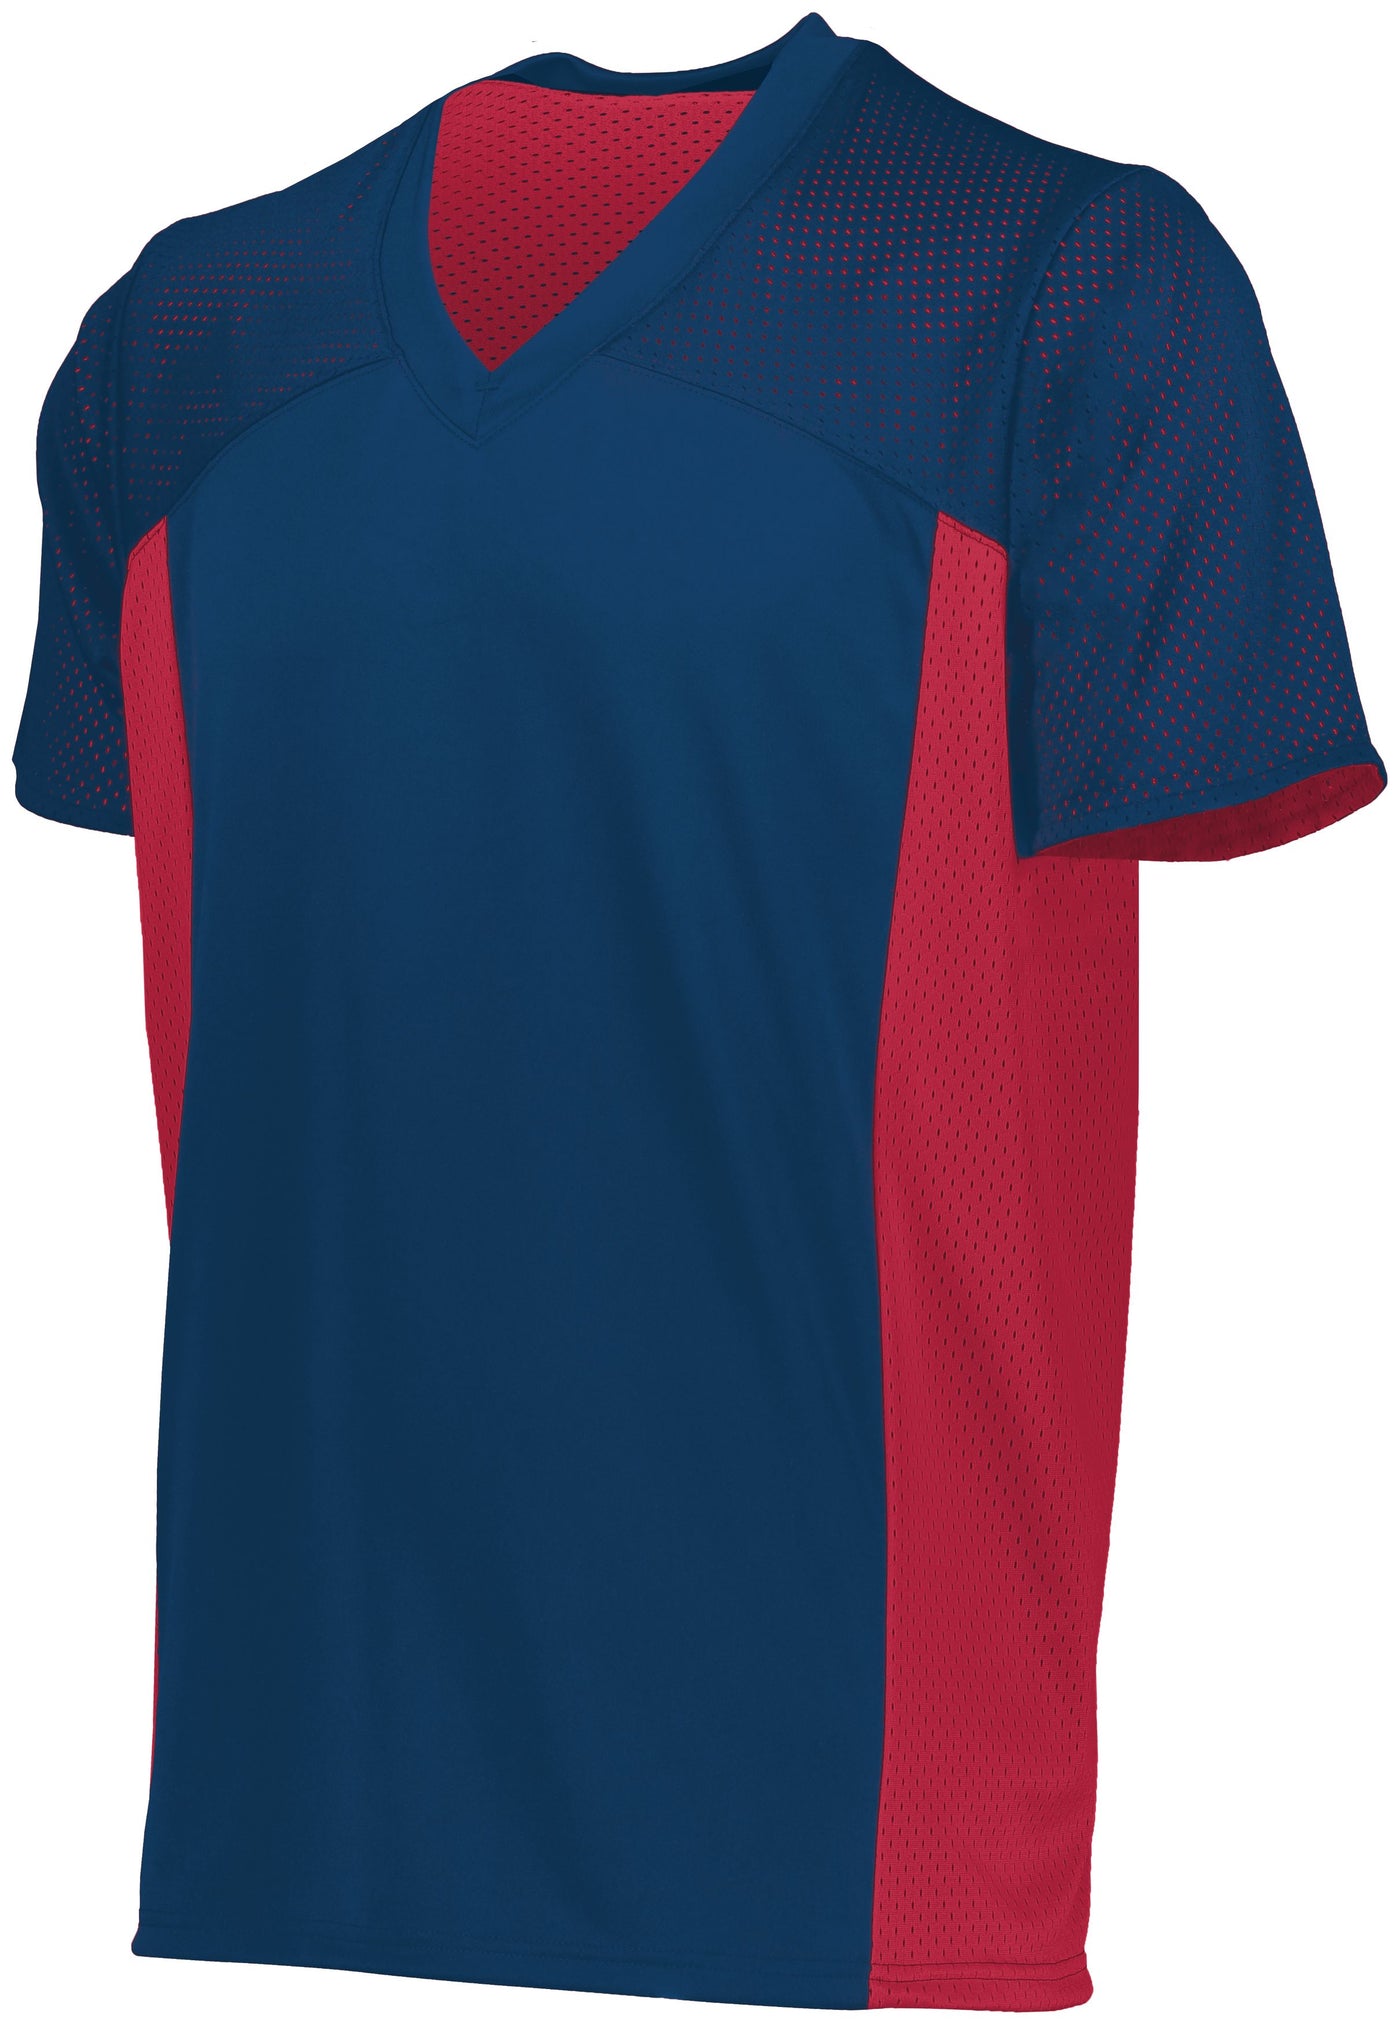 Youth Reversible Flag Football Jersey - Apparel Globe